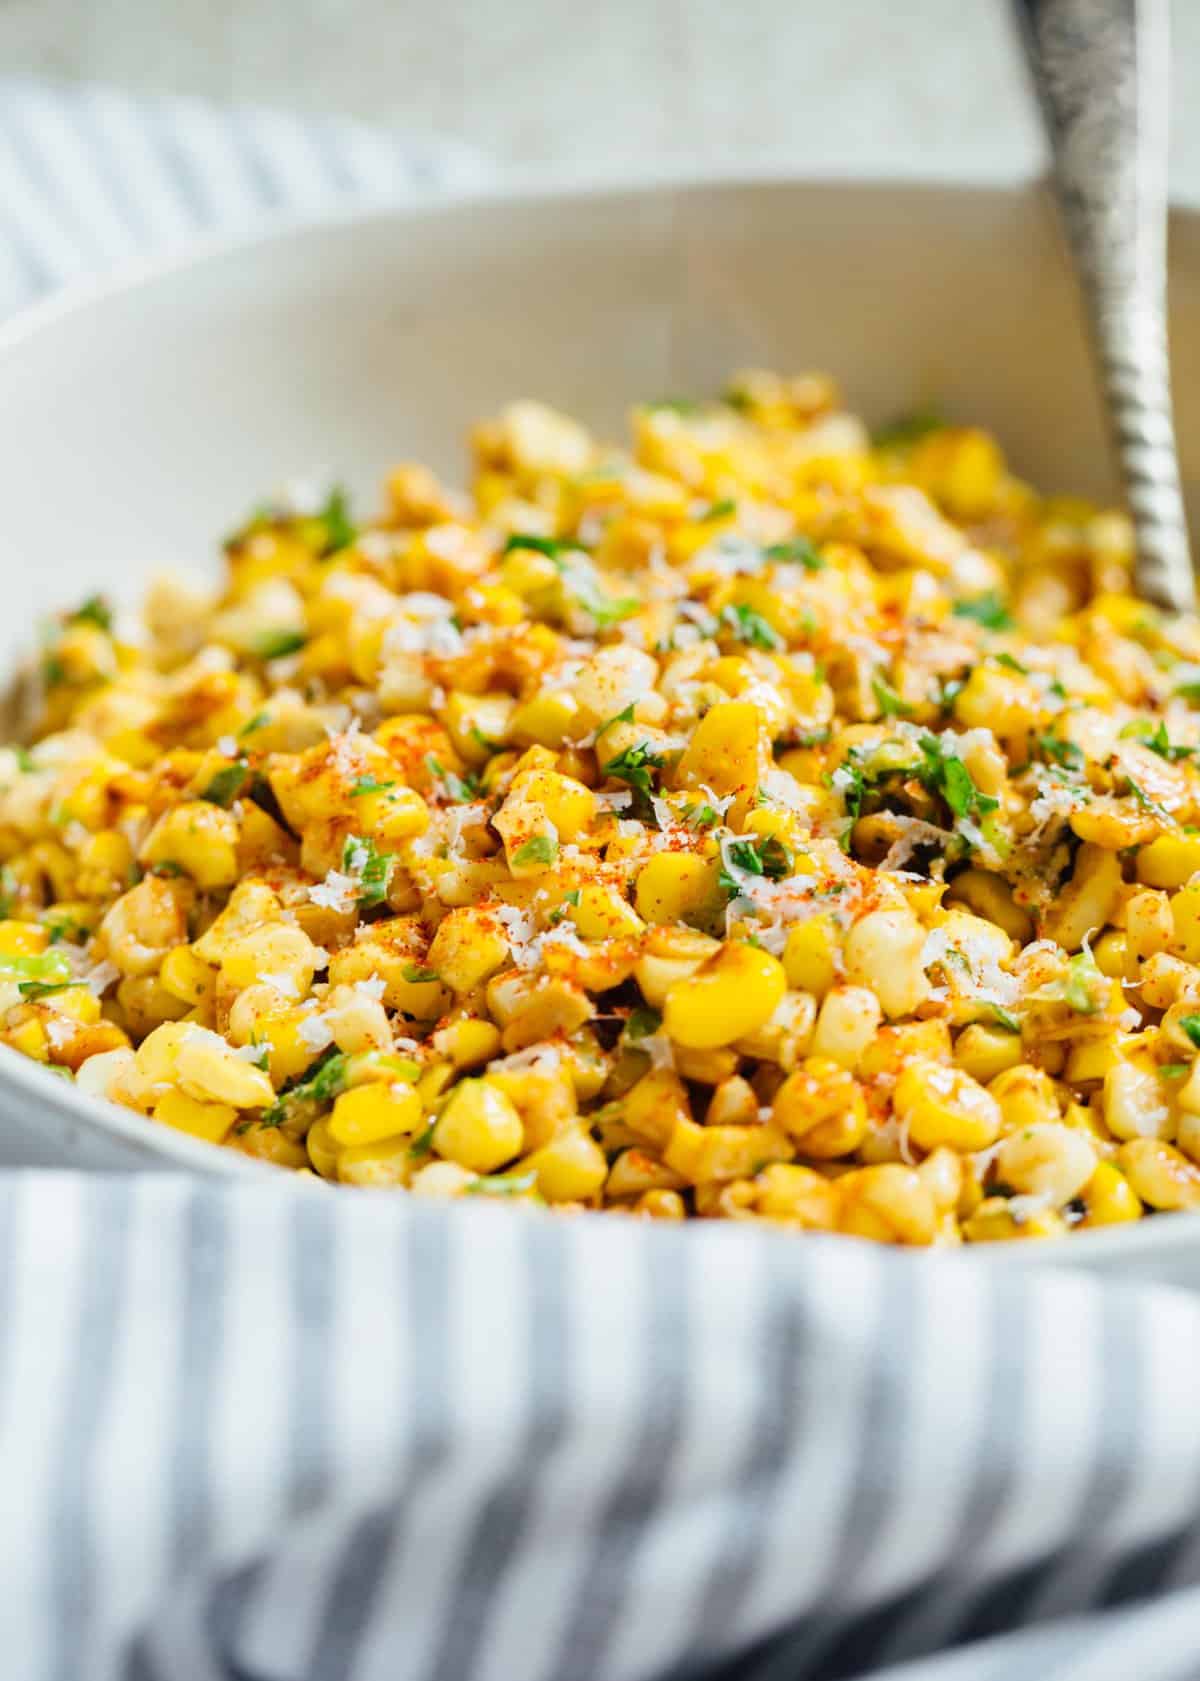 A less messy way to eat Mexican street corn! This Mexican street corn off the cob is one you'll want to make for all your parties year-round! #mexicanstreetcorn #corn #mexican #sidedish #cornrecipe